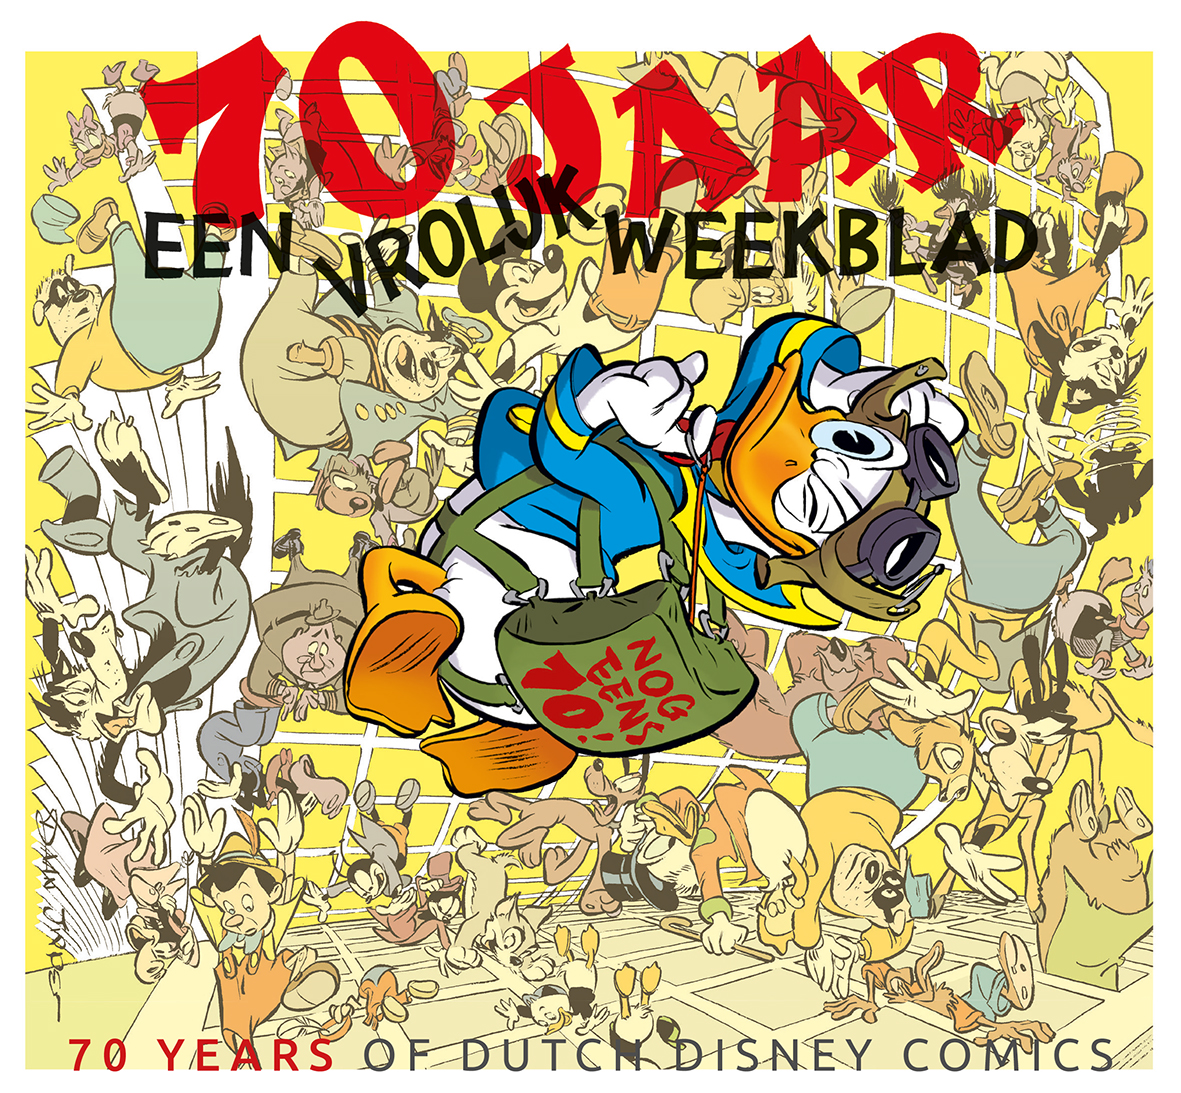 Celebrating 70 years of Donald Duck comics in The Netherlands!